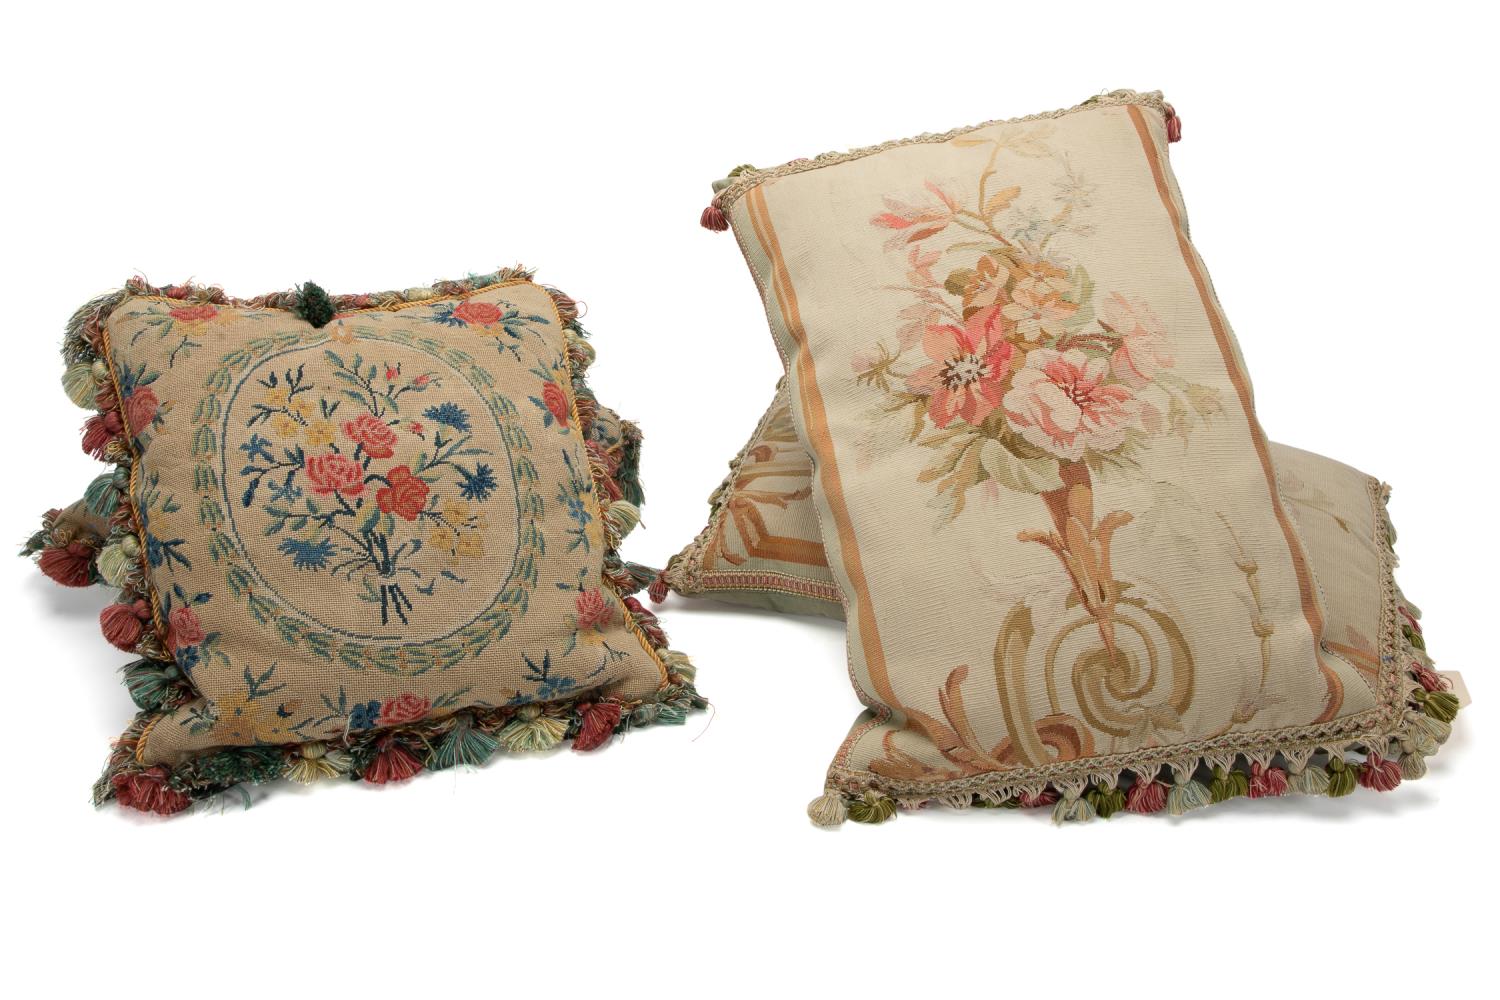 FOUR FLORAL ACCENTS PILLOWS, TWO